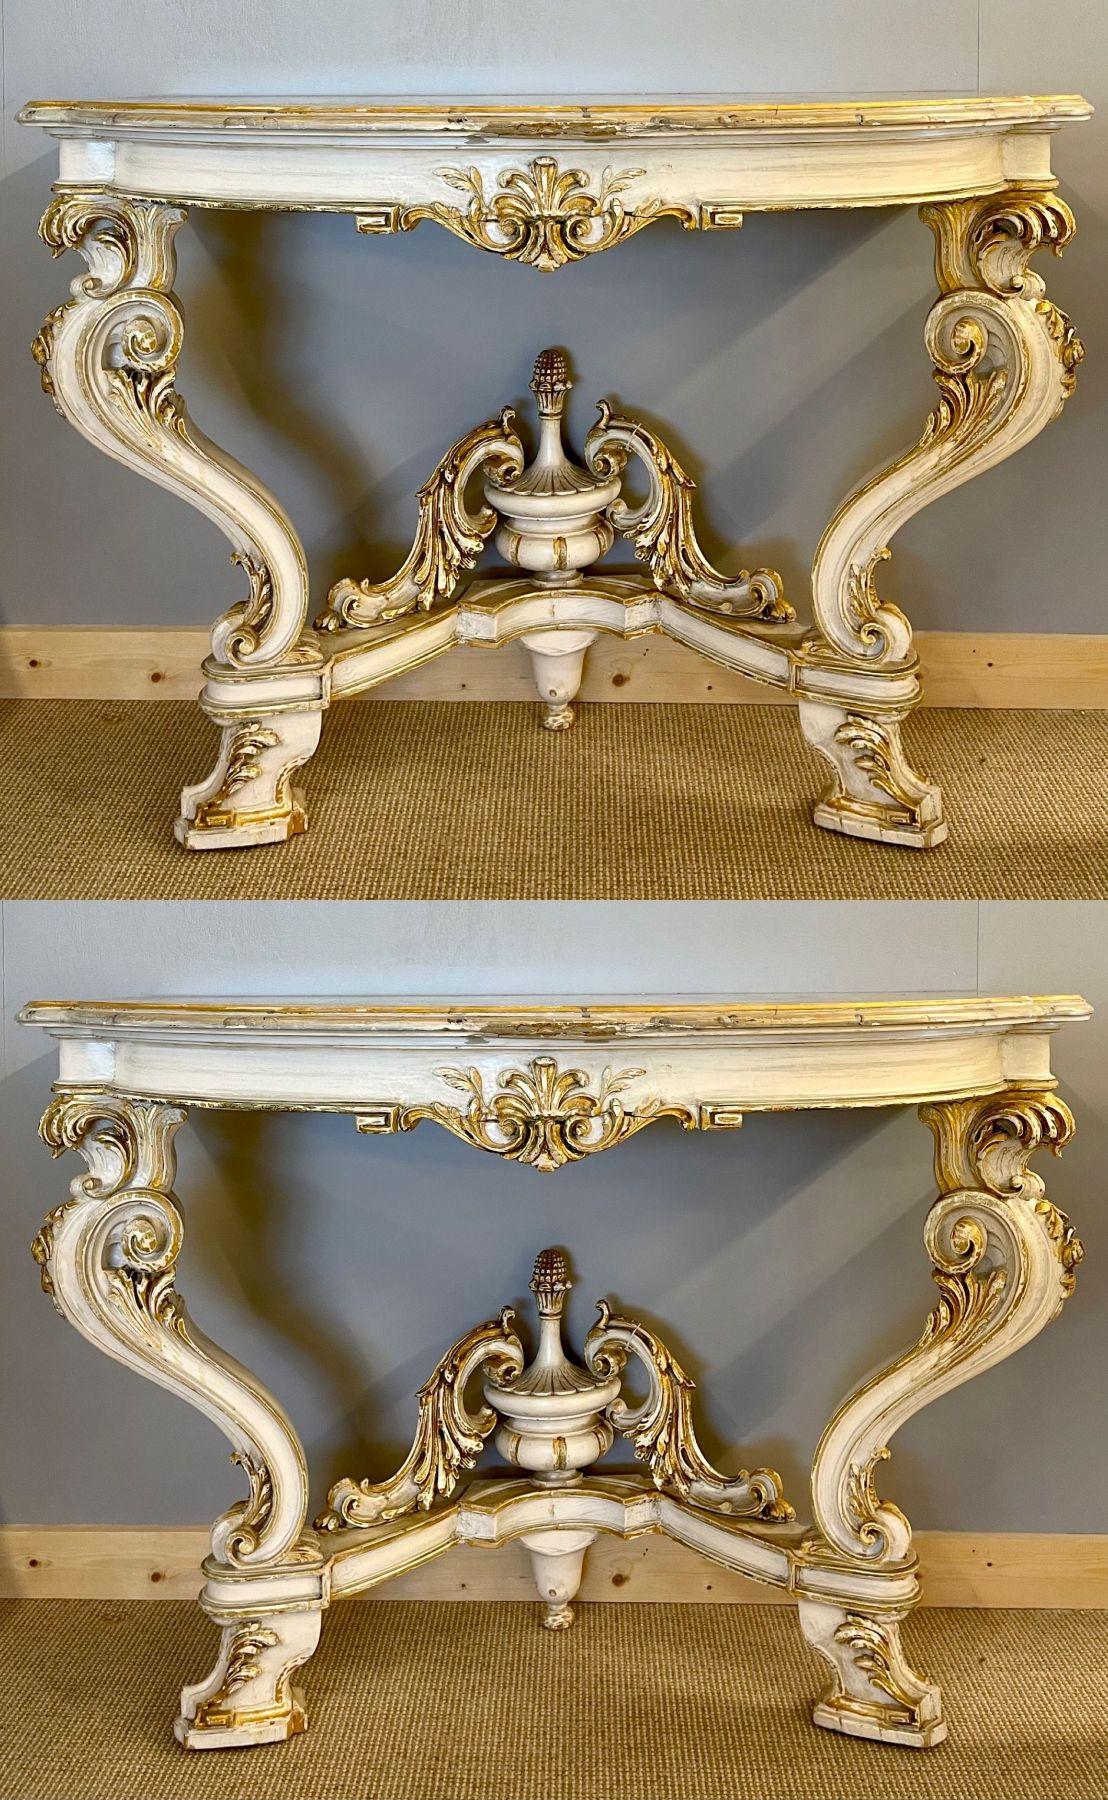 A pair of Italian parcel wonderfully paint and gilt decorated demilune faux marble-top console or sofa tables, late 19th or early 20th century these finely carved cabriole leg freestanding consoles could use a little support from being mounted